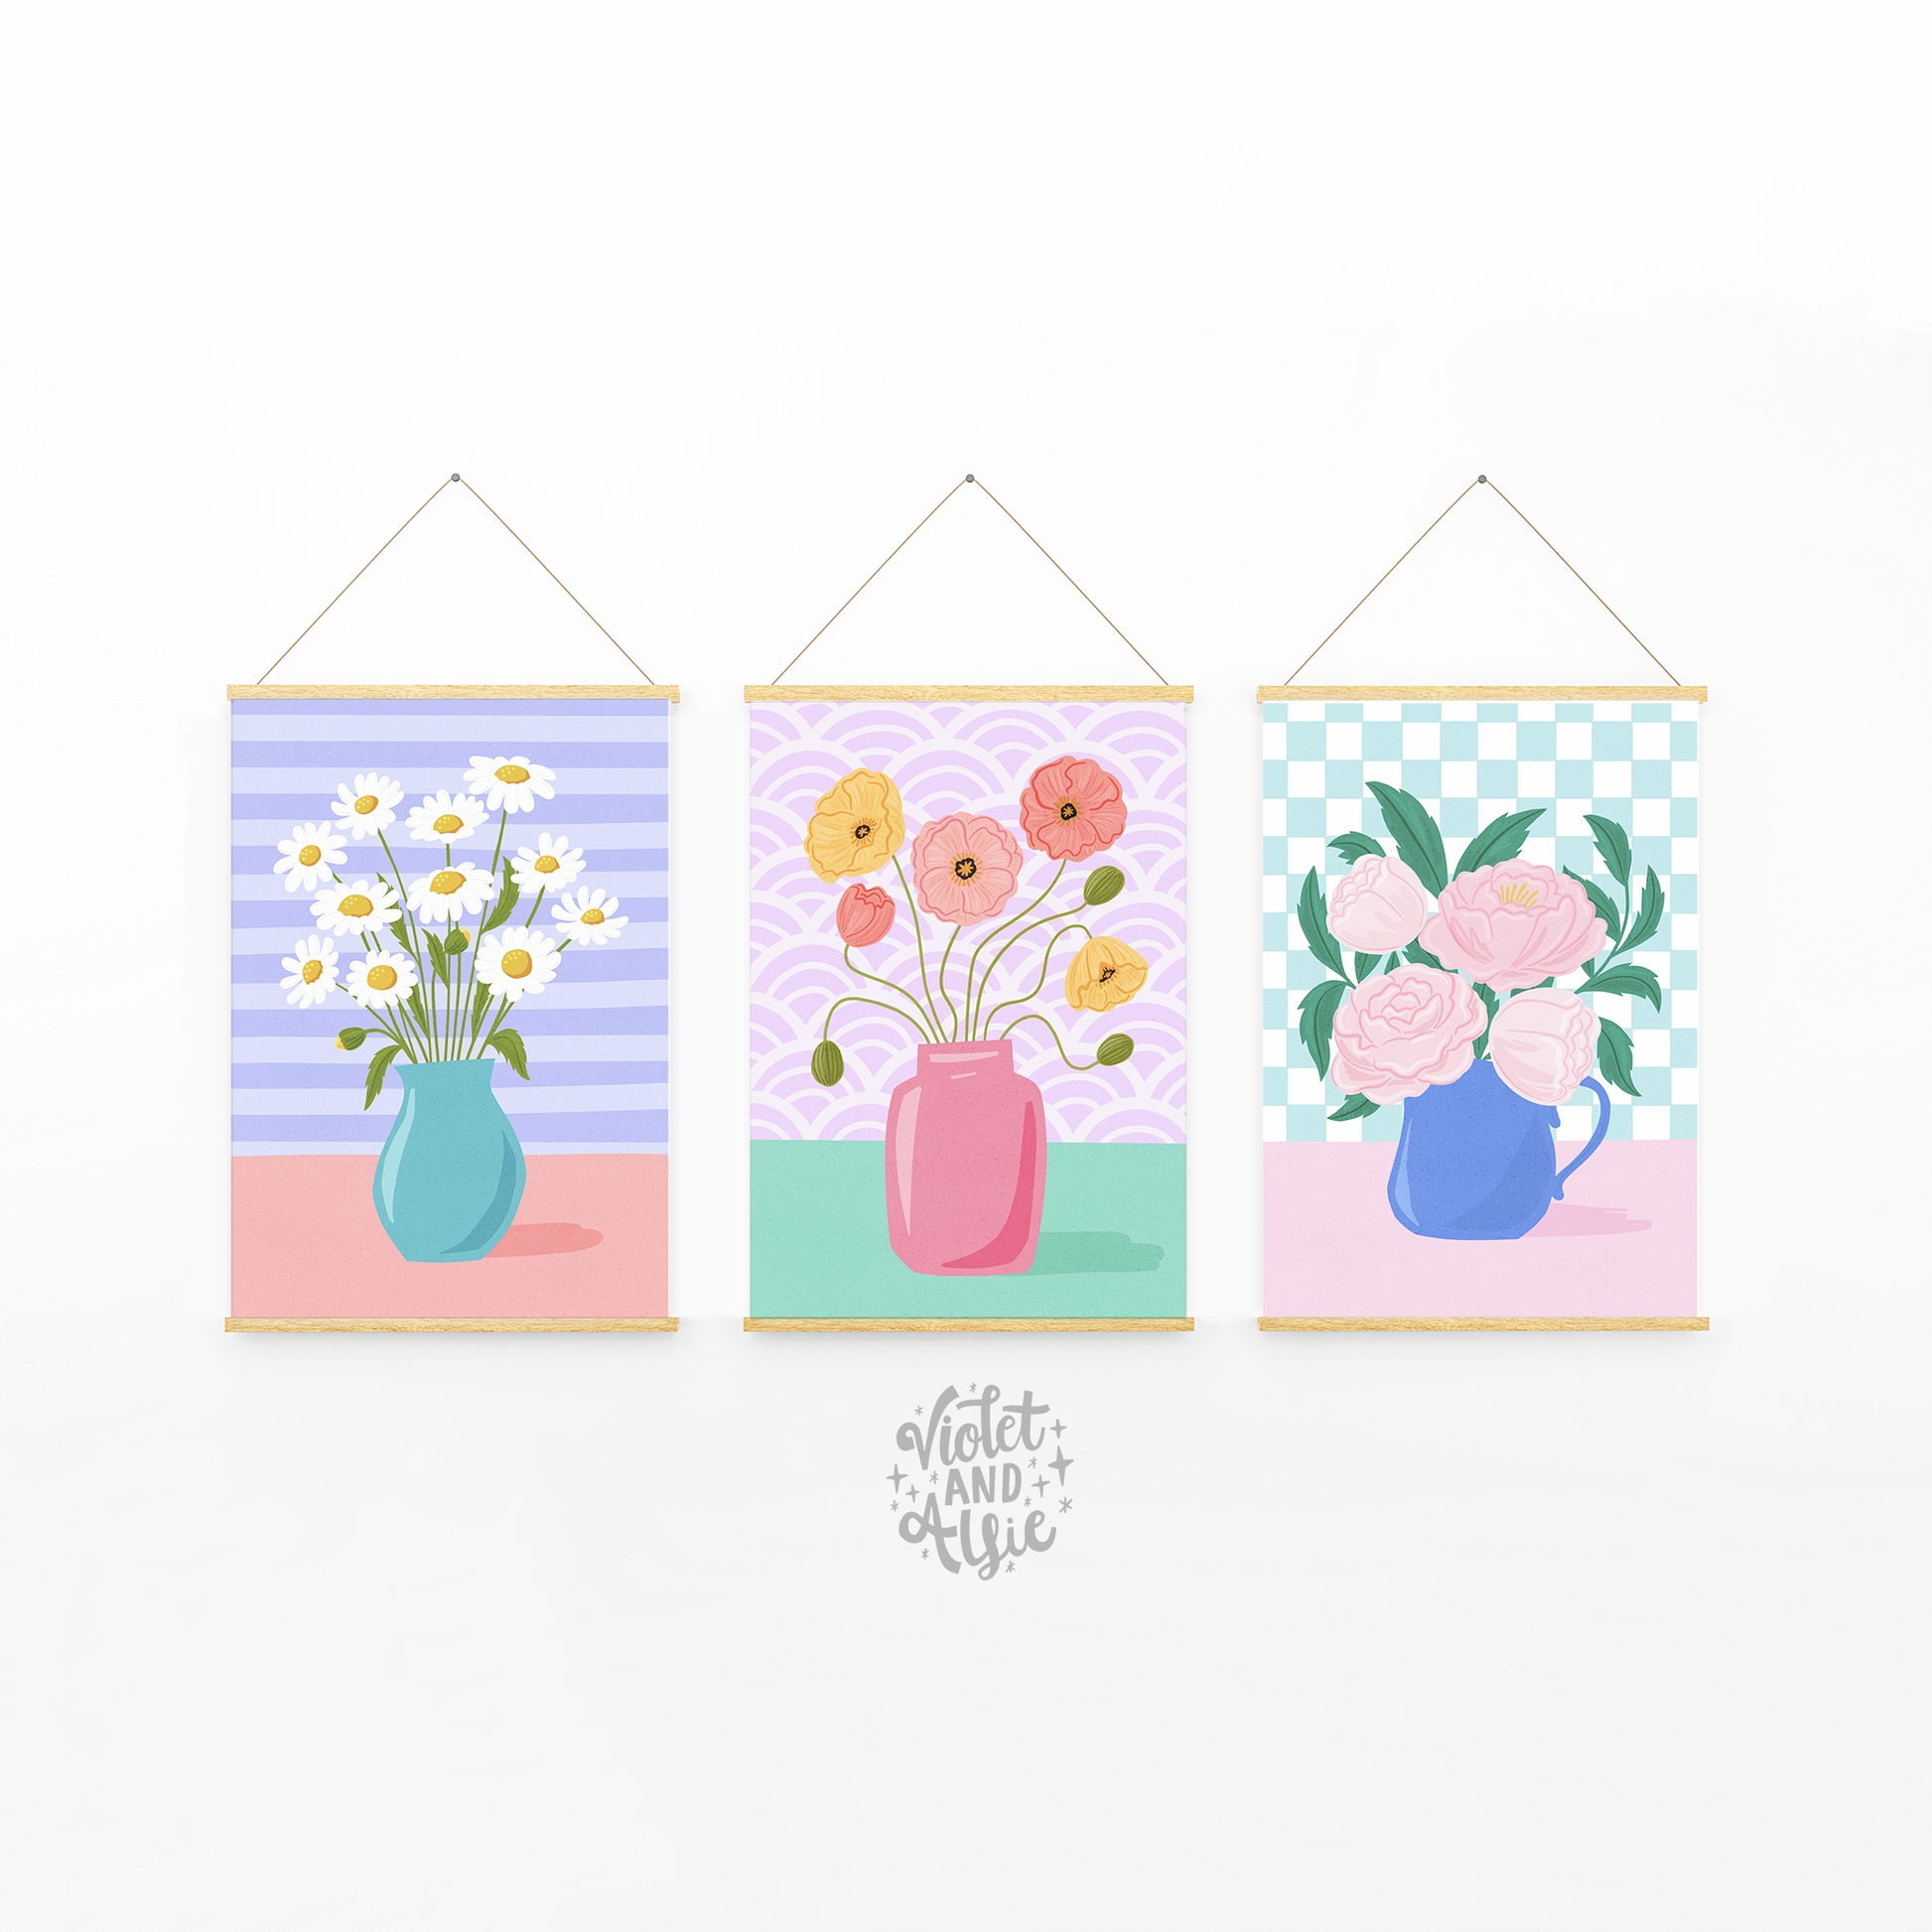 This gorgeous eclectic pastel print set is fab for bringing the outside in and adding some fresh floral illustration to brighten up any space. It includes our Peony, Poppy and Daisy modern botanical designs. Set of Three Floral Illustration Prints, Trendy Flower Wall Art, trendy prints for your home, pastel aesthetic decor, pastel floral wall prints, flower posters, home office decor art, trendy flower art prints 